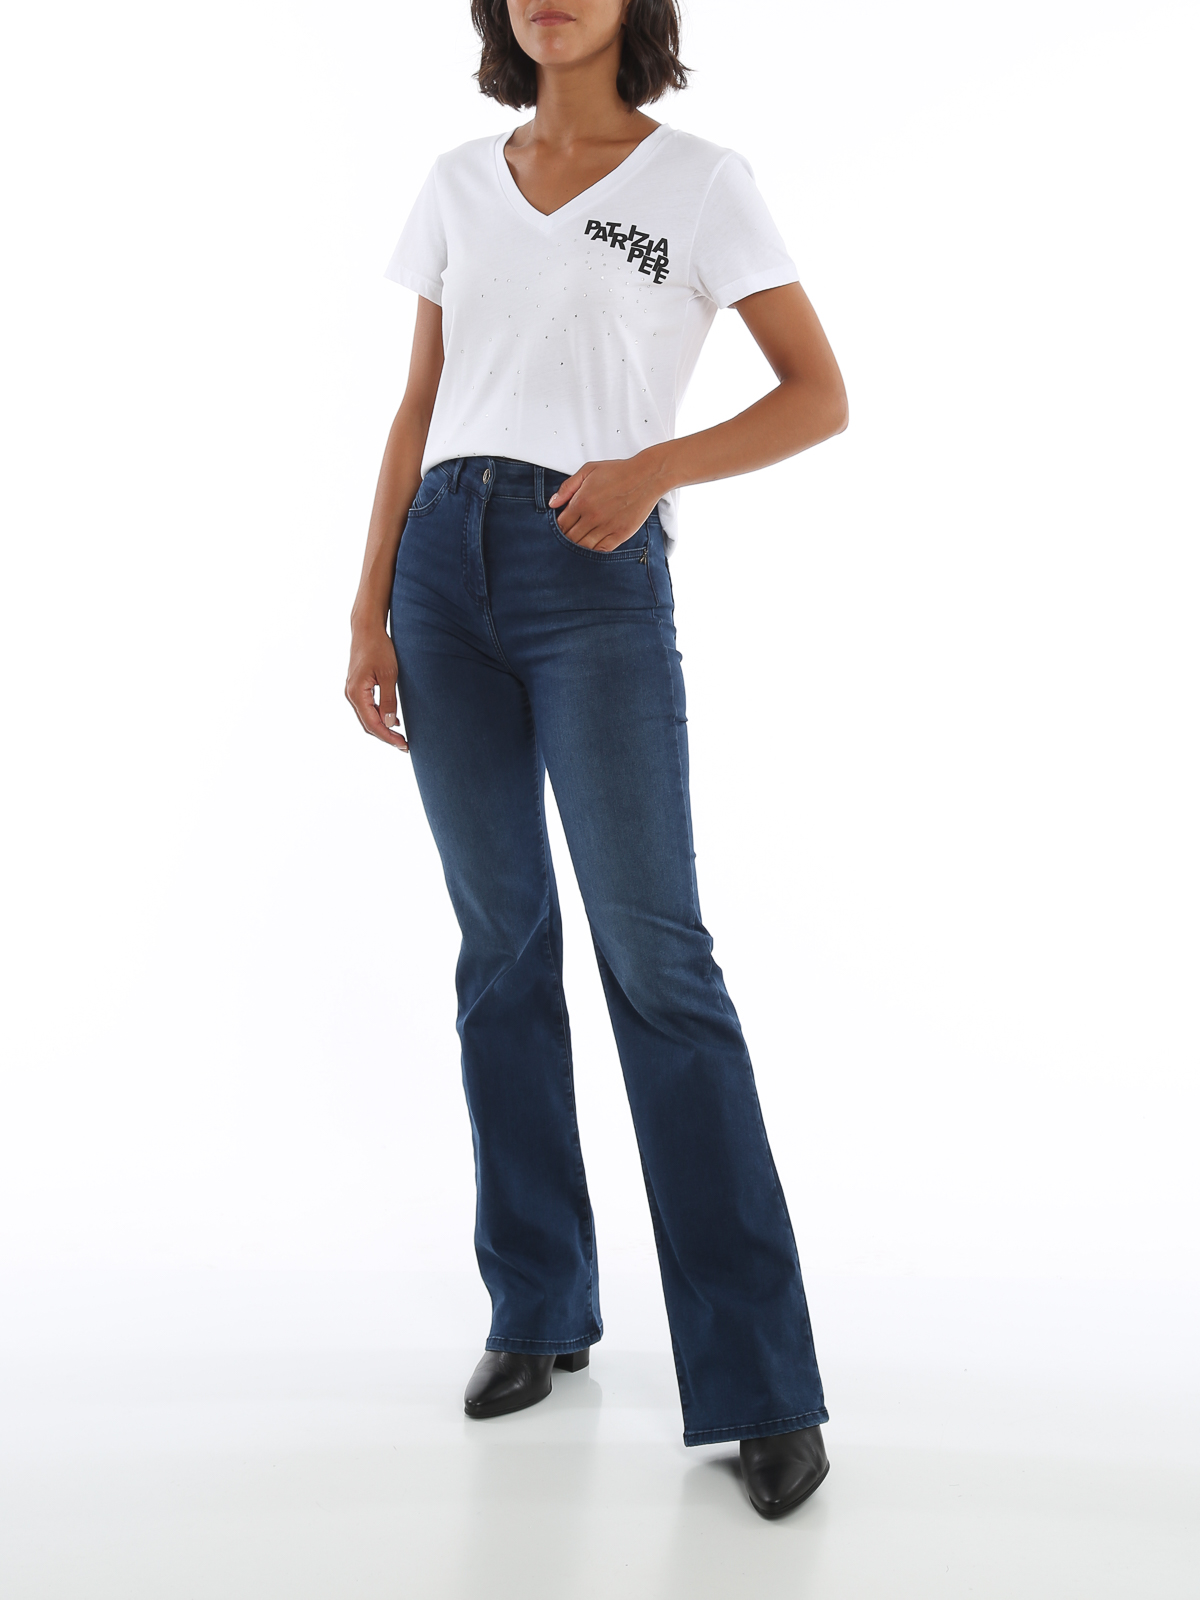 Helemaal droog De stad Nieuwheid Flared jeans Patrizia Pepe - Embroidered pocket bootcut jeans -  8J0937A1HIBC843